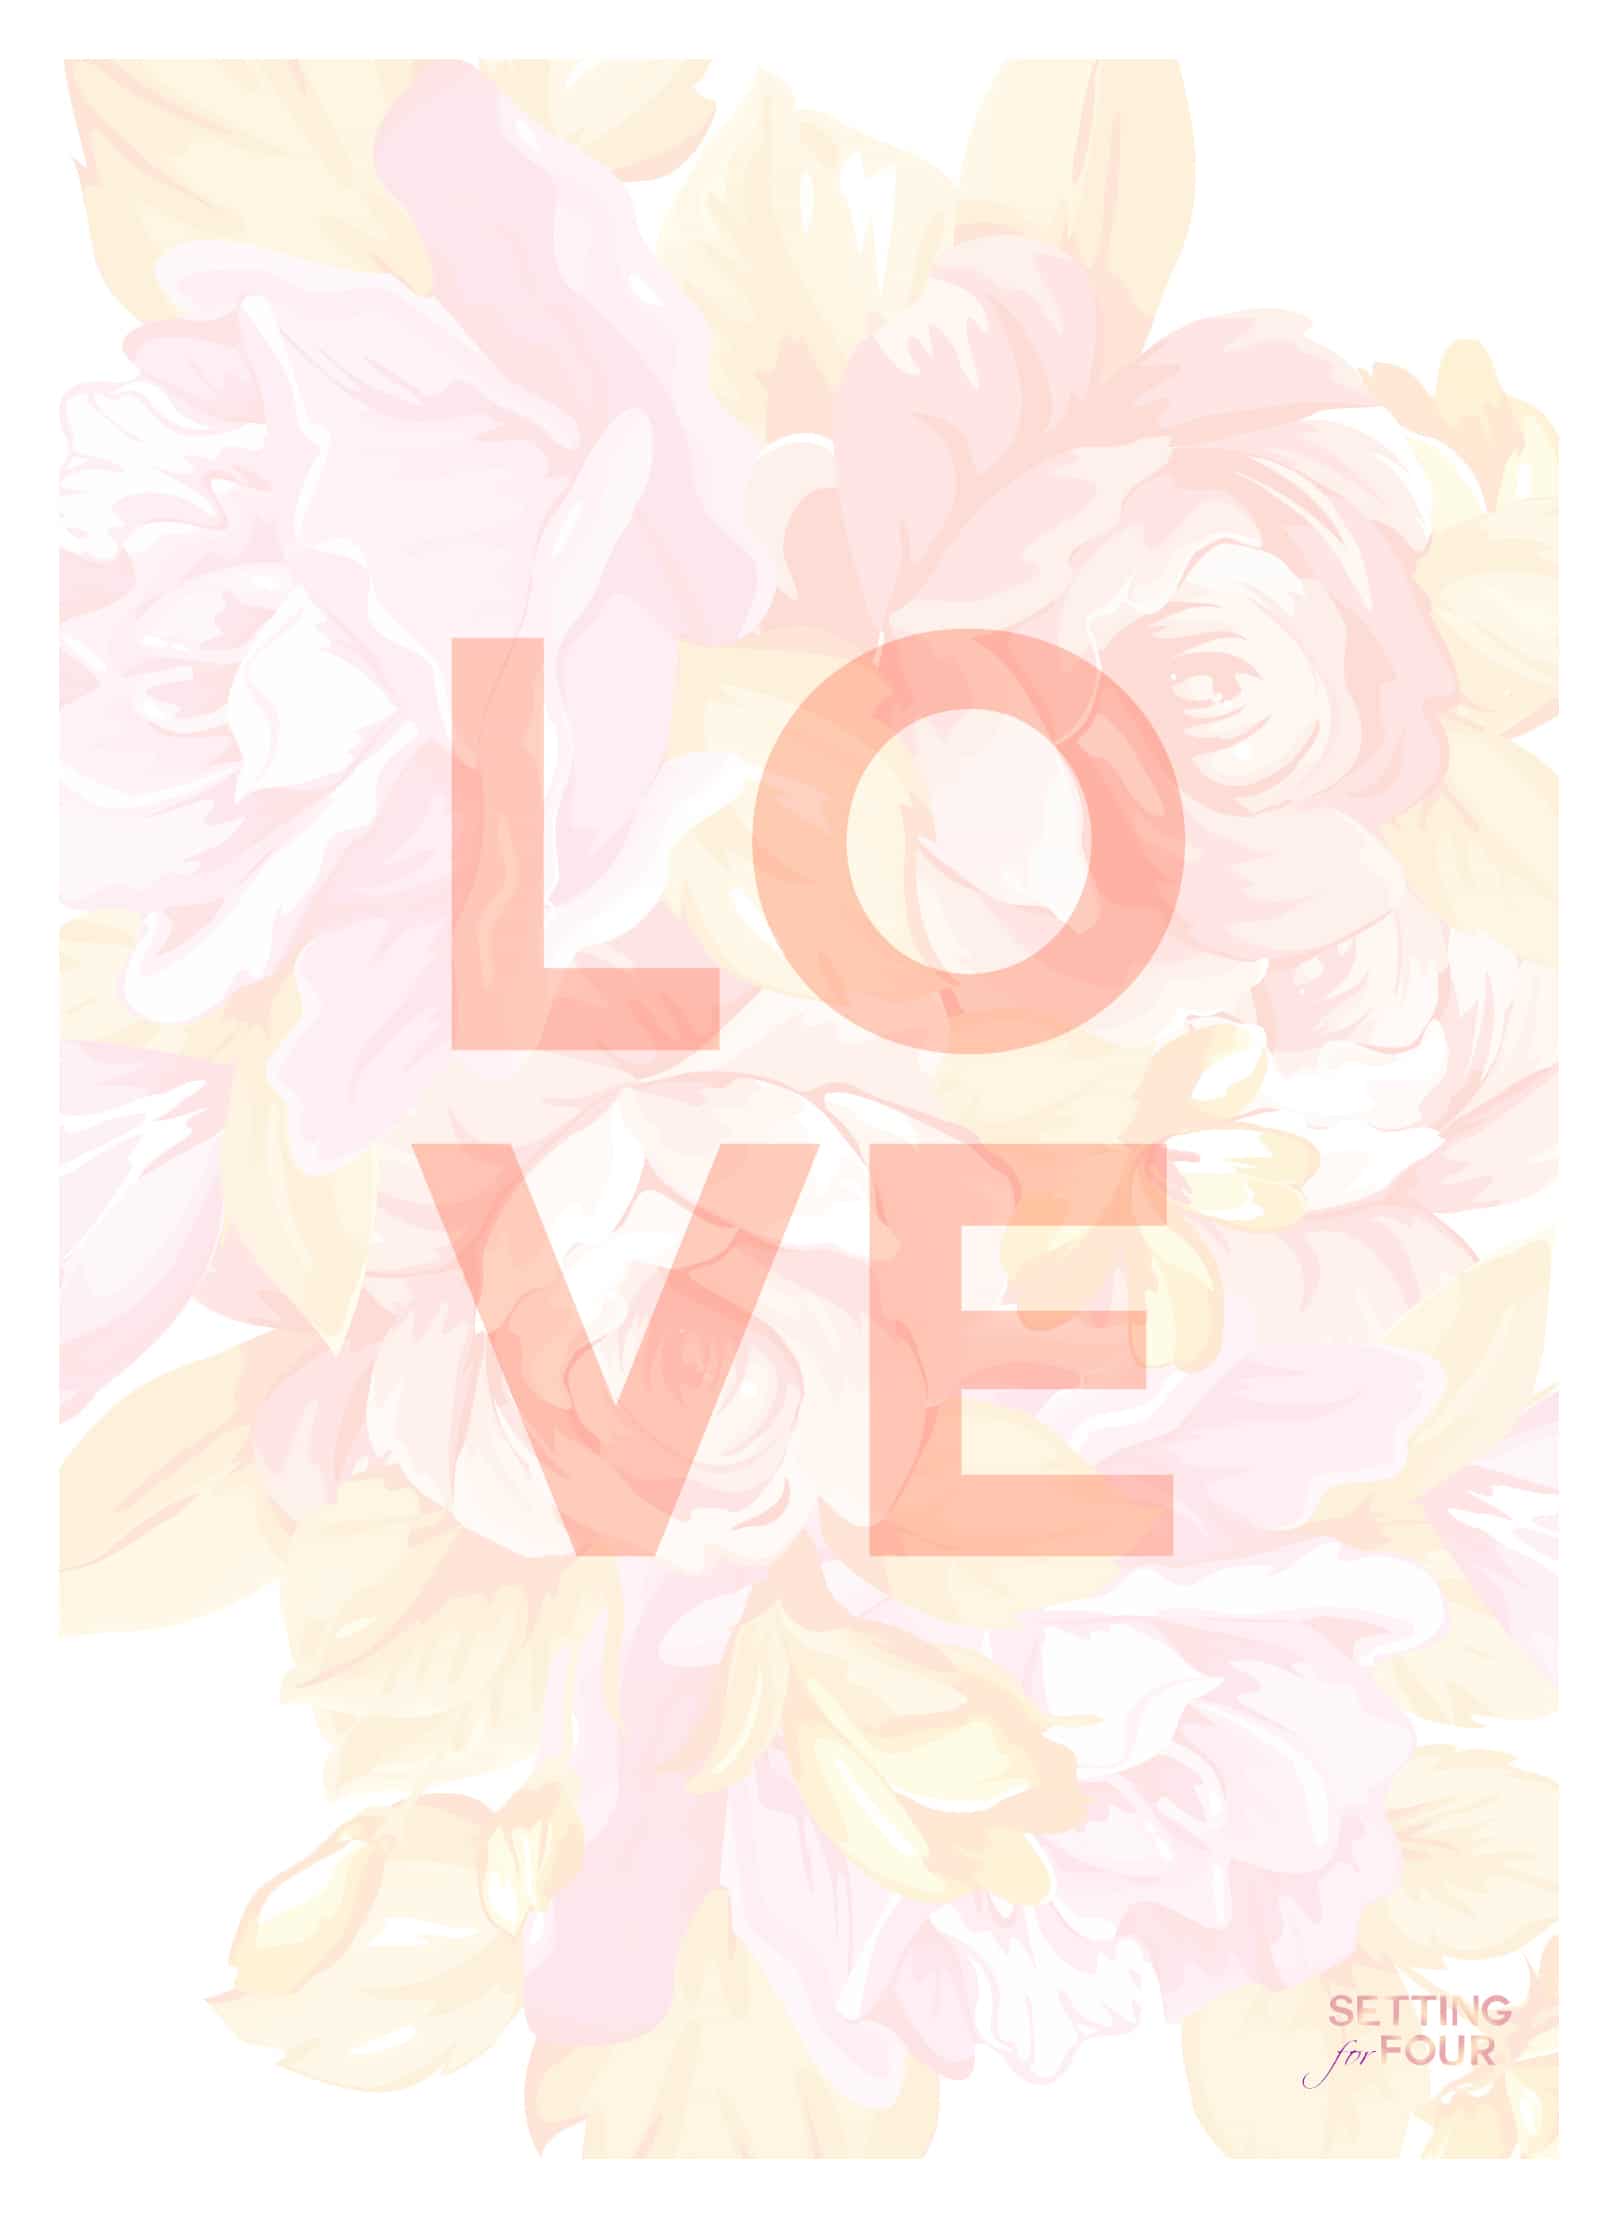 FREE Floral iPhone, iPad Wallpaper and Printable Art for Four